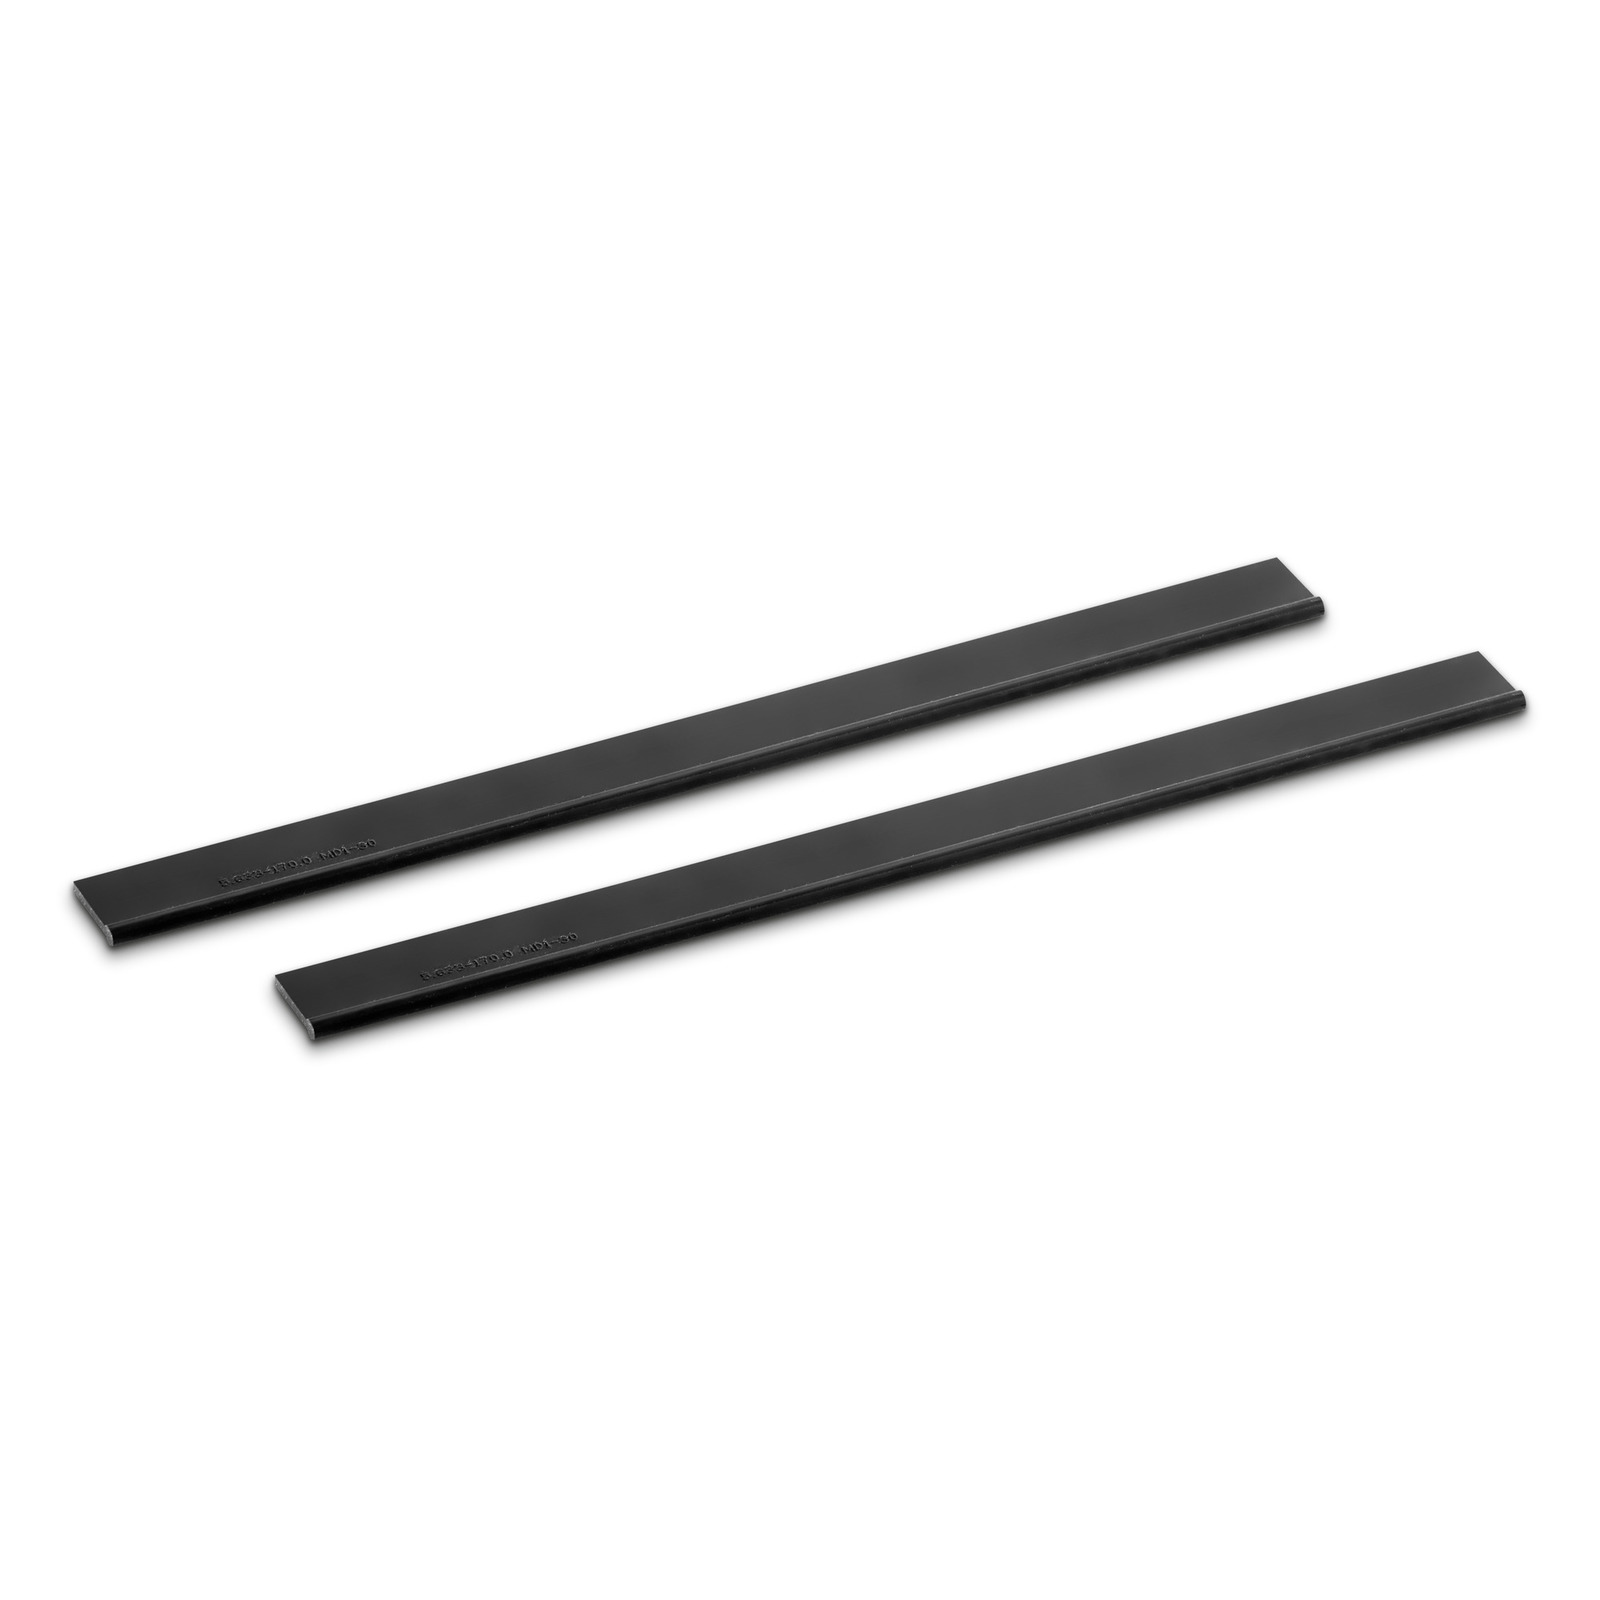 Rubber Strip Window Cleaner Parts280/250/170MM Window Cleaner Washer  Scrapers for Karcher WV1 WV2 WV5 Glass Window Clean Scraper